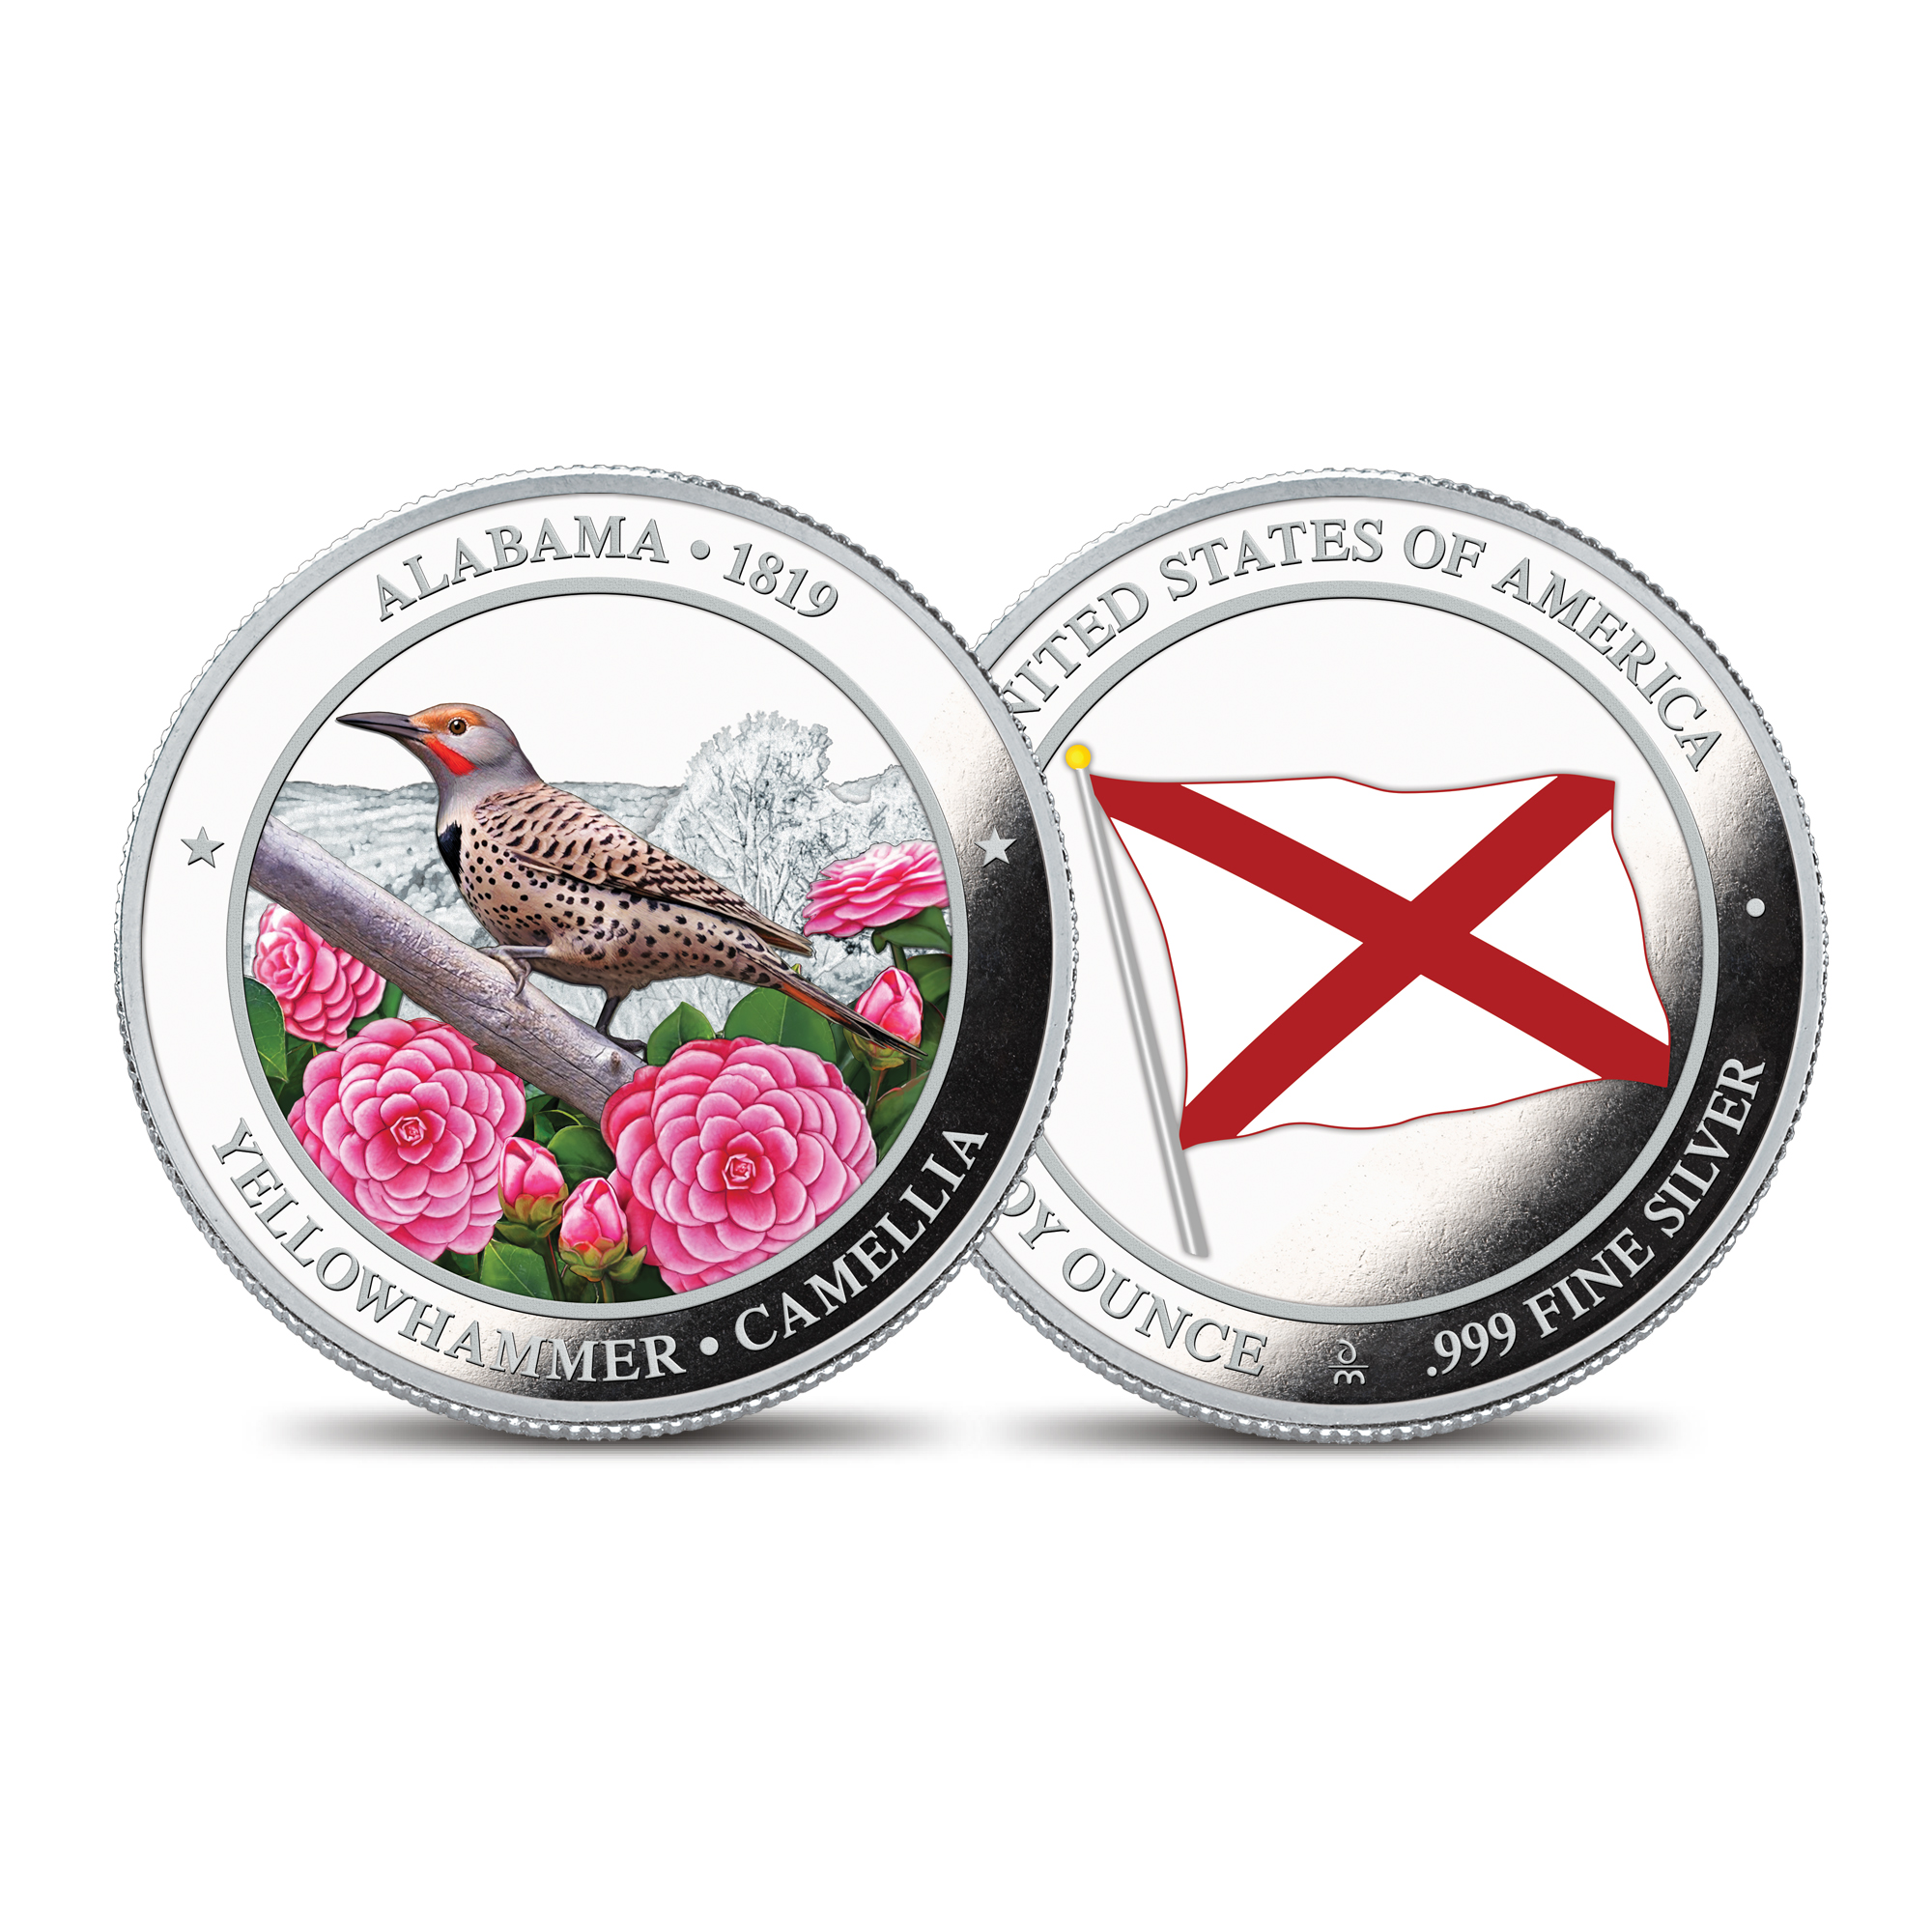 The California State Bird and Flower Silver Commemorative 2167 006 2 1